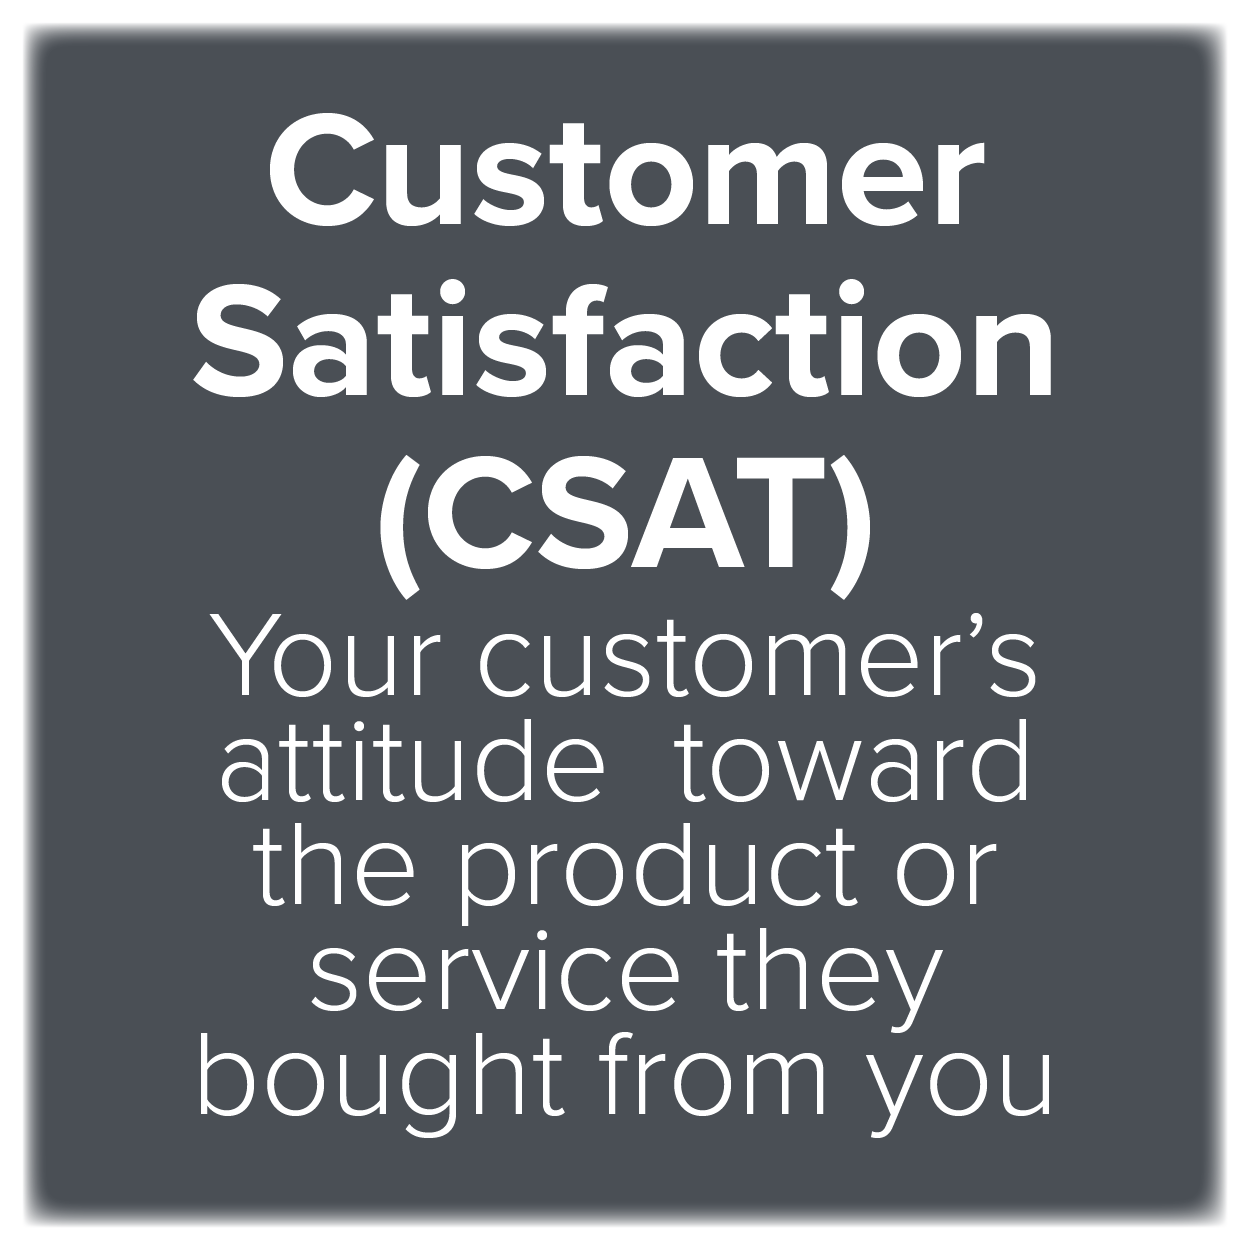 Measuring Customer Satisfaction (CSAT), Product Quality (PQUAL), and Net Promoter Score (NPS)